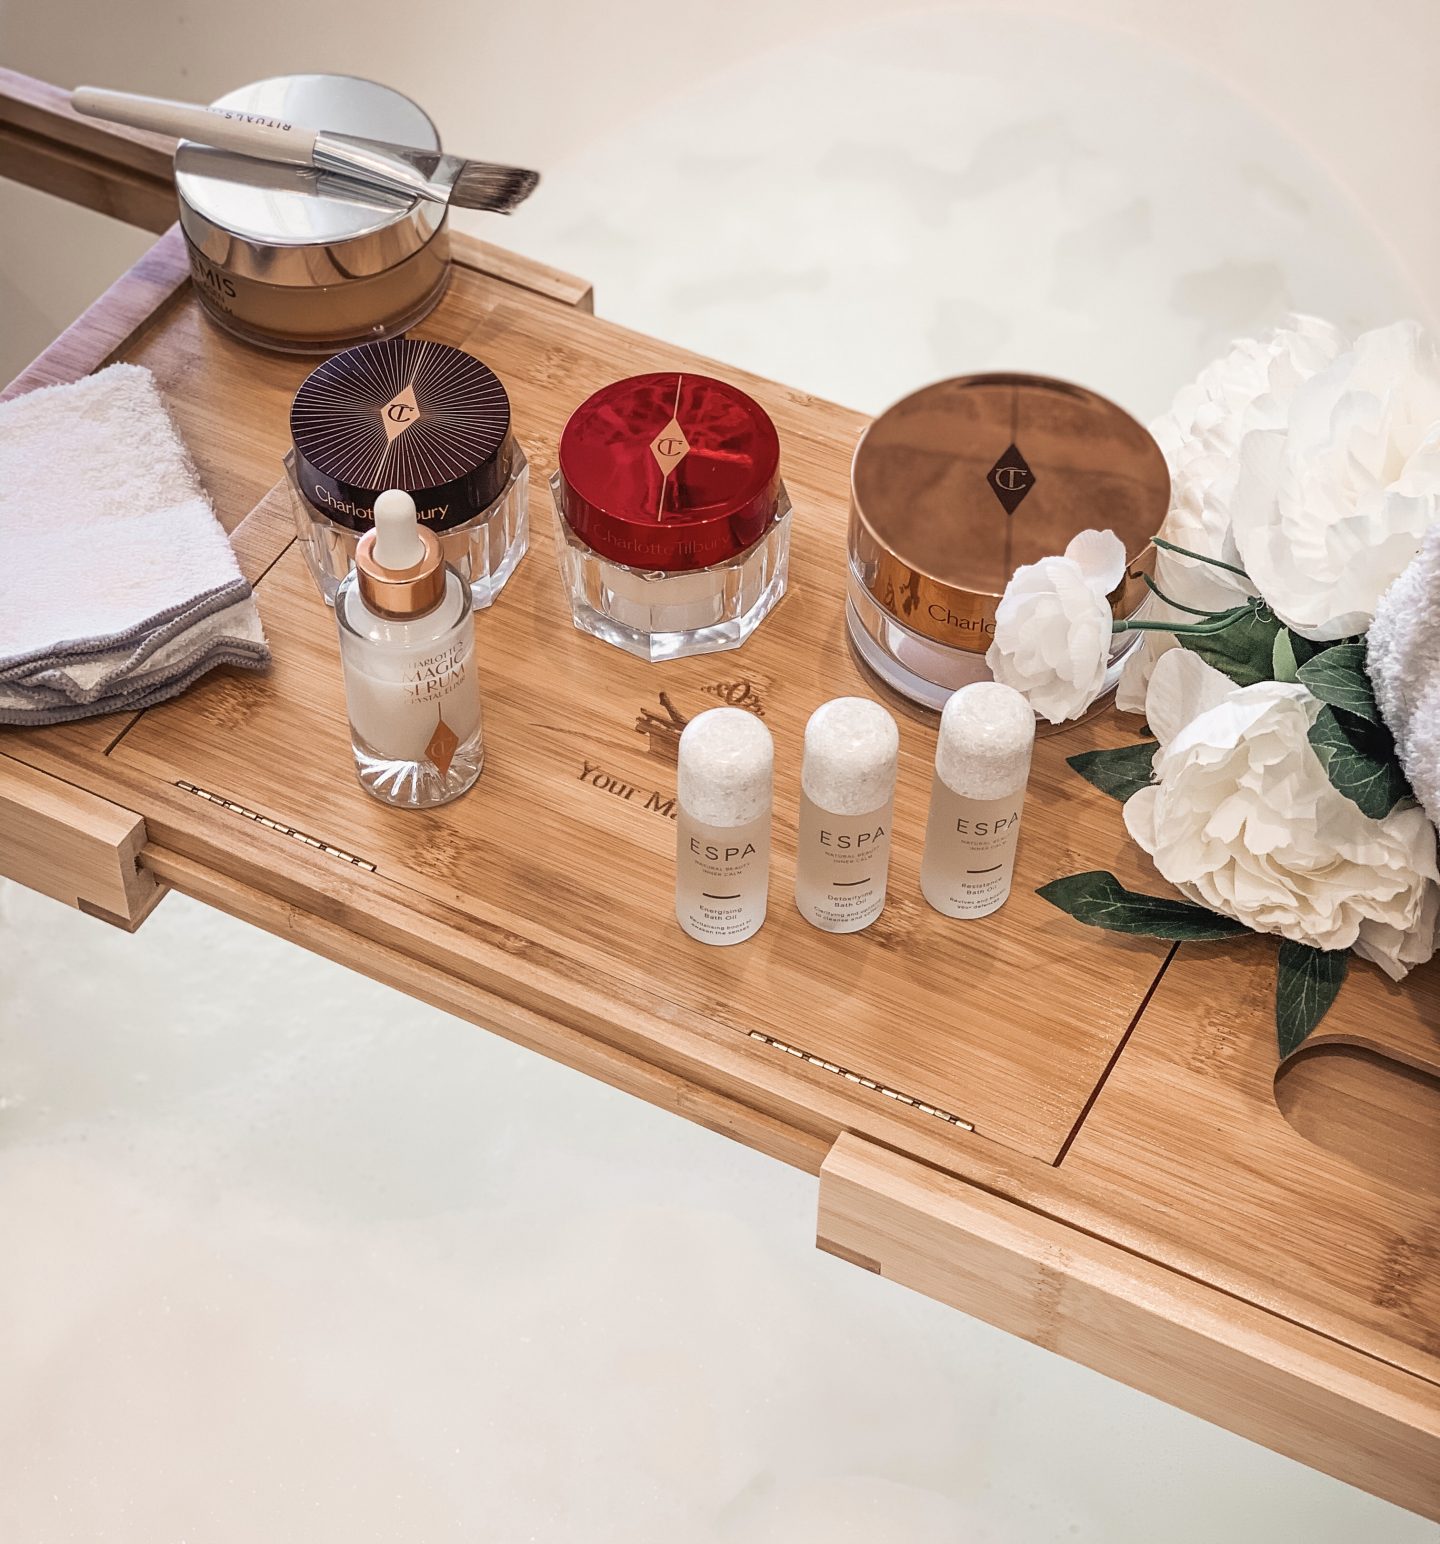 SPA AT HOME | ELEMIS PRODUCTS, CHARLOTTE TILBURY PRODUCTS